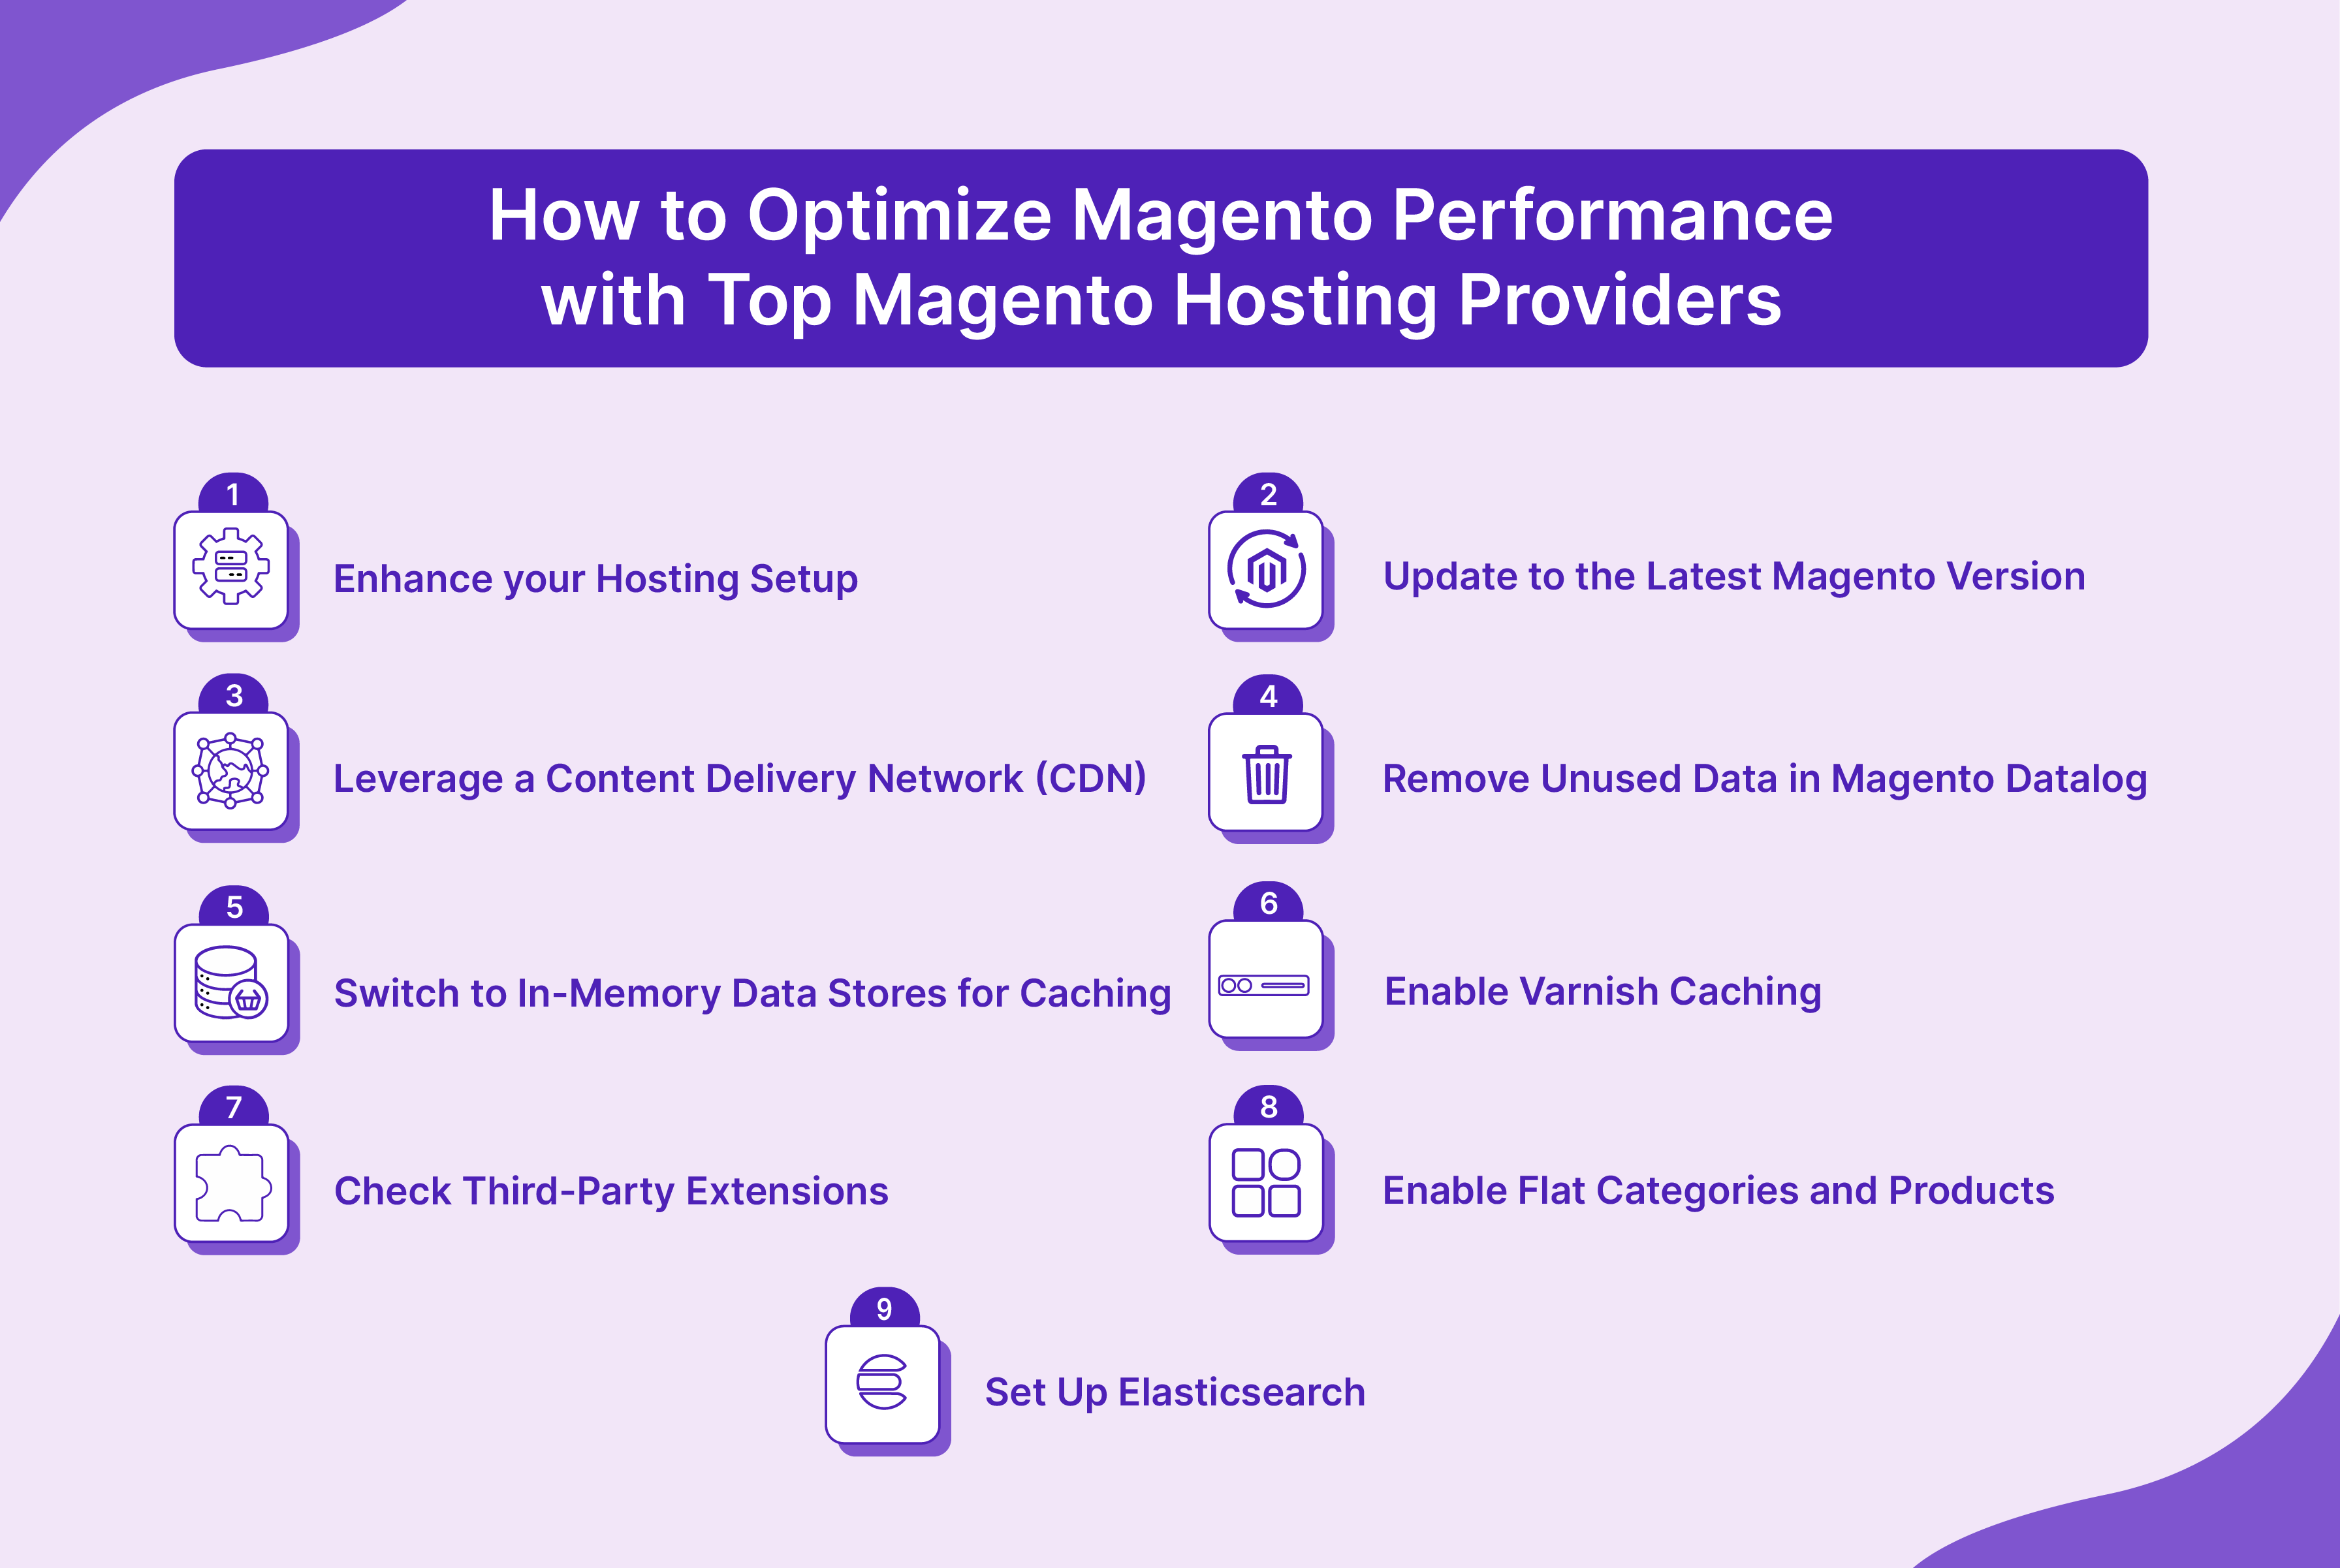 How to Optimize Magento Performance with Top Magento Hosting Providers 2023